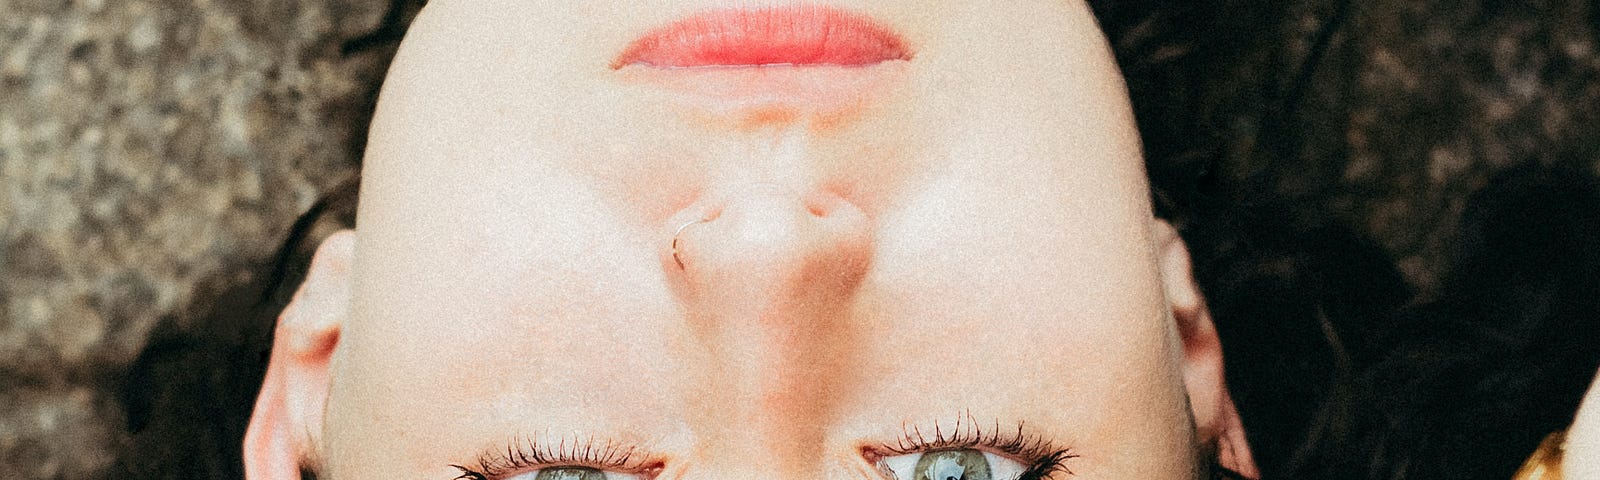 Close up of woman’s face. Picture is upside down. Her hand is on her forehead. She wears a white dress with red flowers.